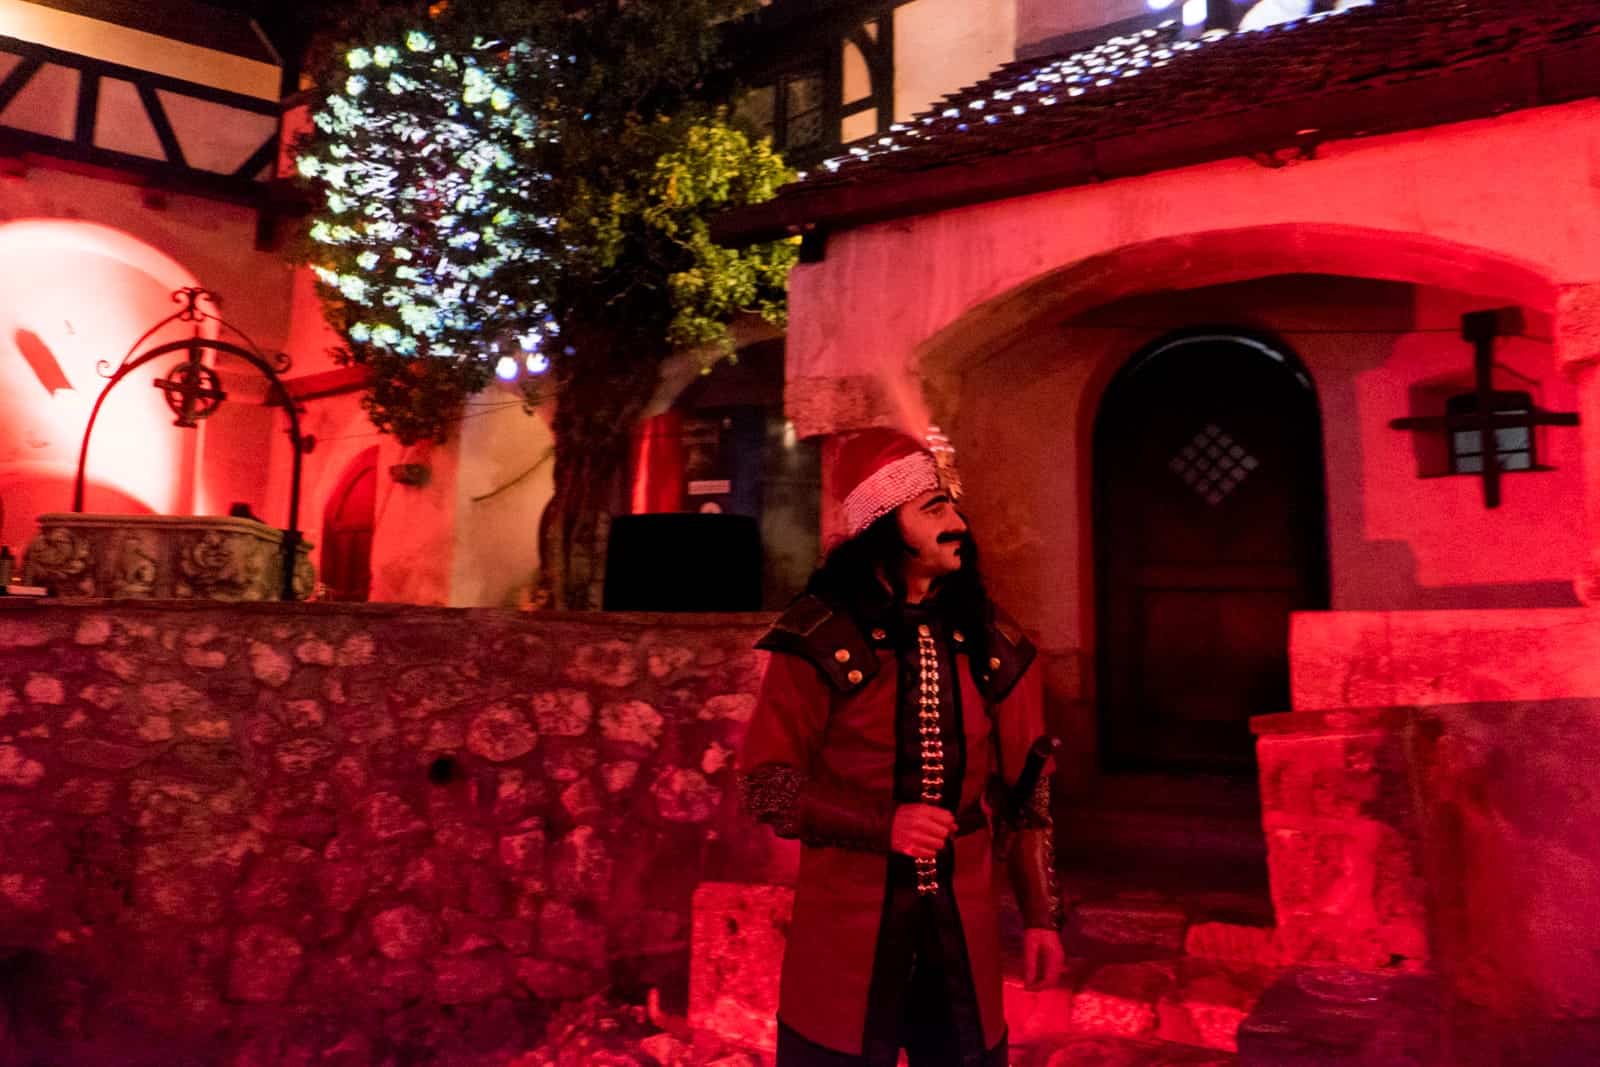 A man dressed as Vlad the Impaler at a Halloween party in Bran Castle, Transylvania, Romania